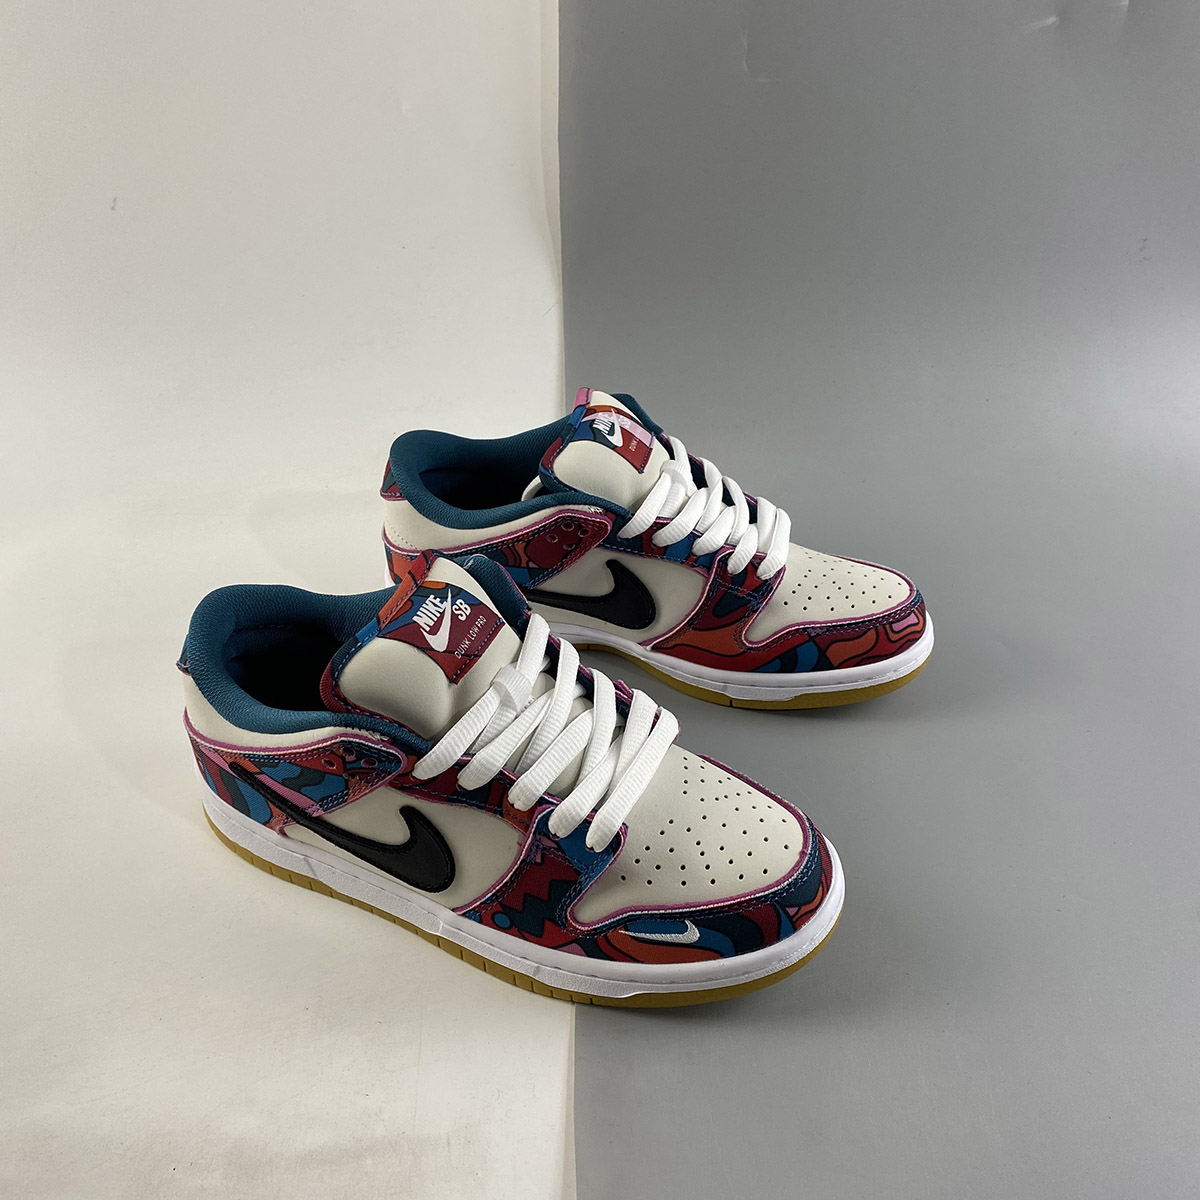 Parra x Nike SB Dunk Low “Abstract Art” Fireberry/Black For Sale – The ...